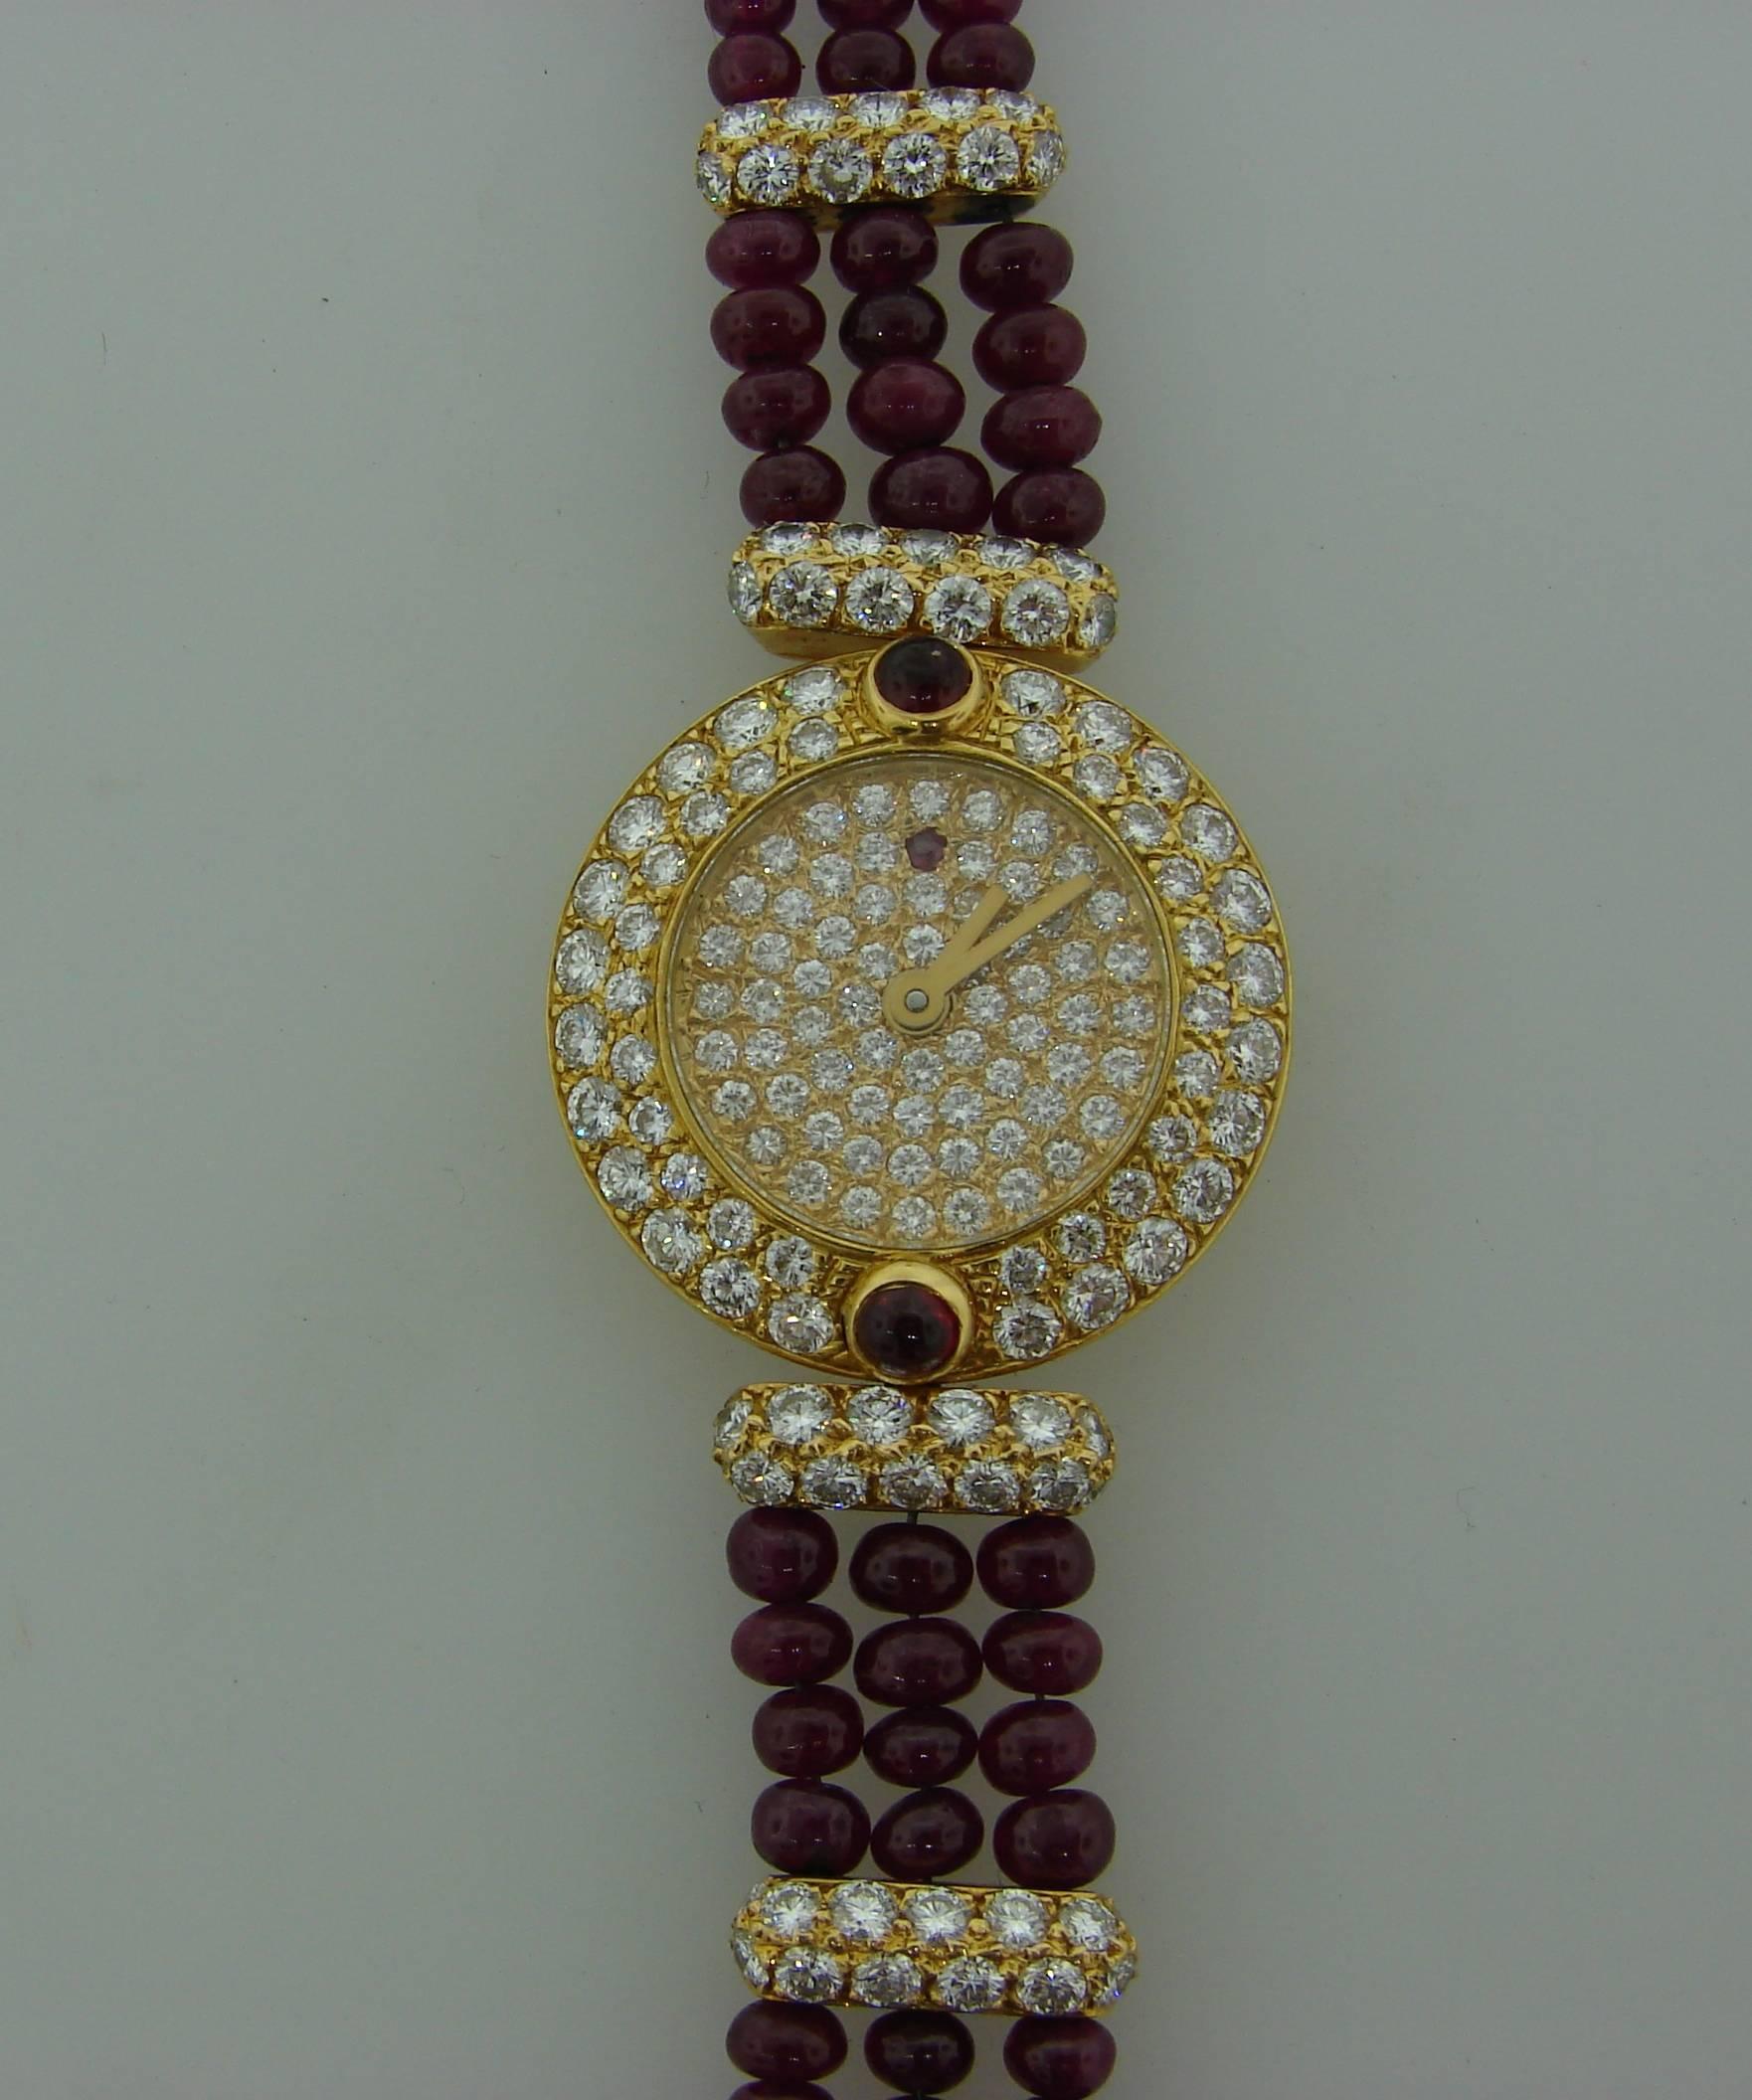 Elegant lady's watch made of 18 karat (stamped) yellow gold. The watch face is encrusted with round brilliant cut diamonds and the bracelet is made of ruby beads and diamonds. 
Quartz movement.
Face is 24.5 mm (1 inch) in diameter, the bracelet is